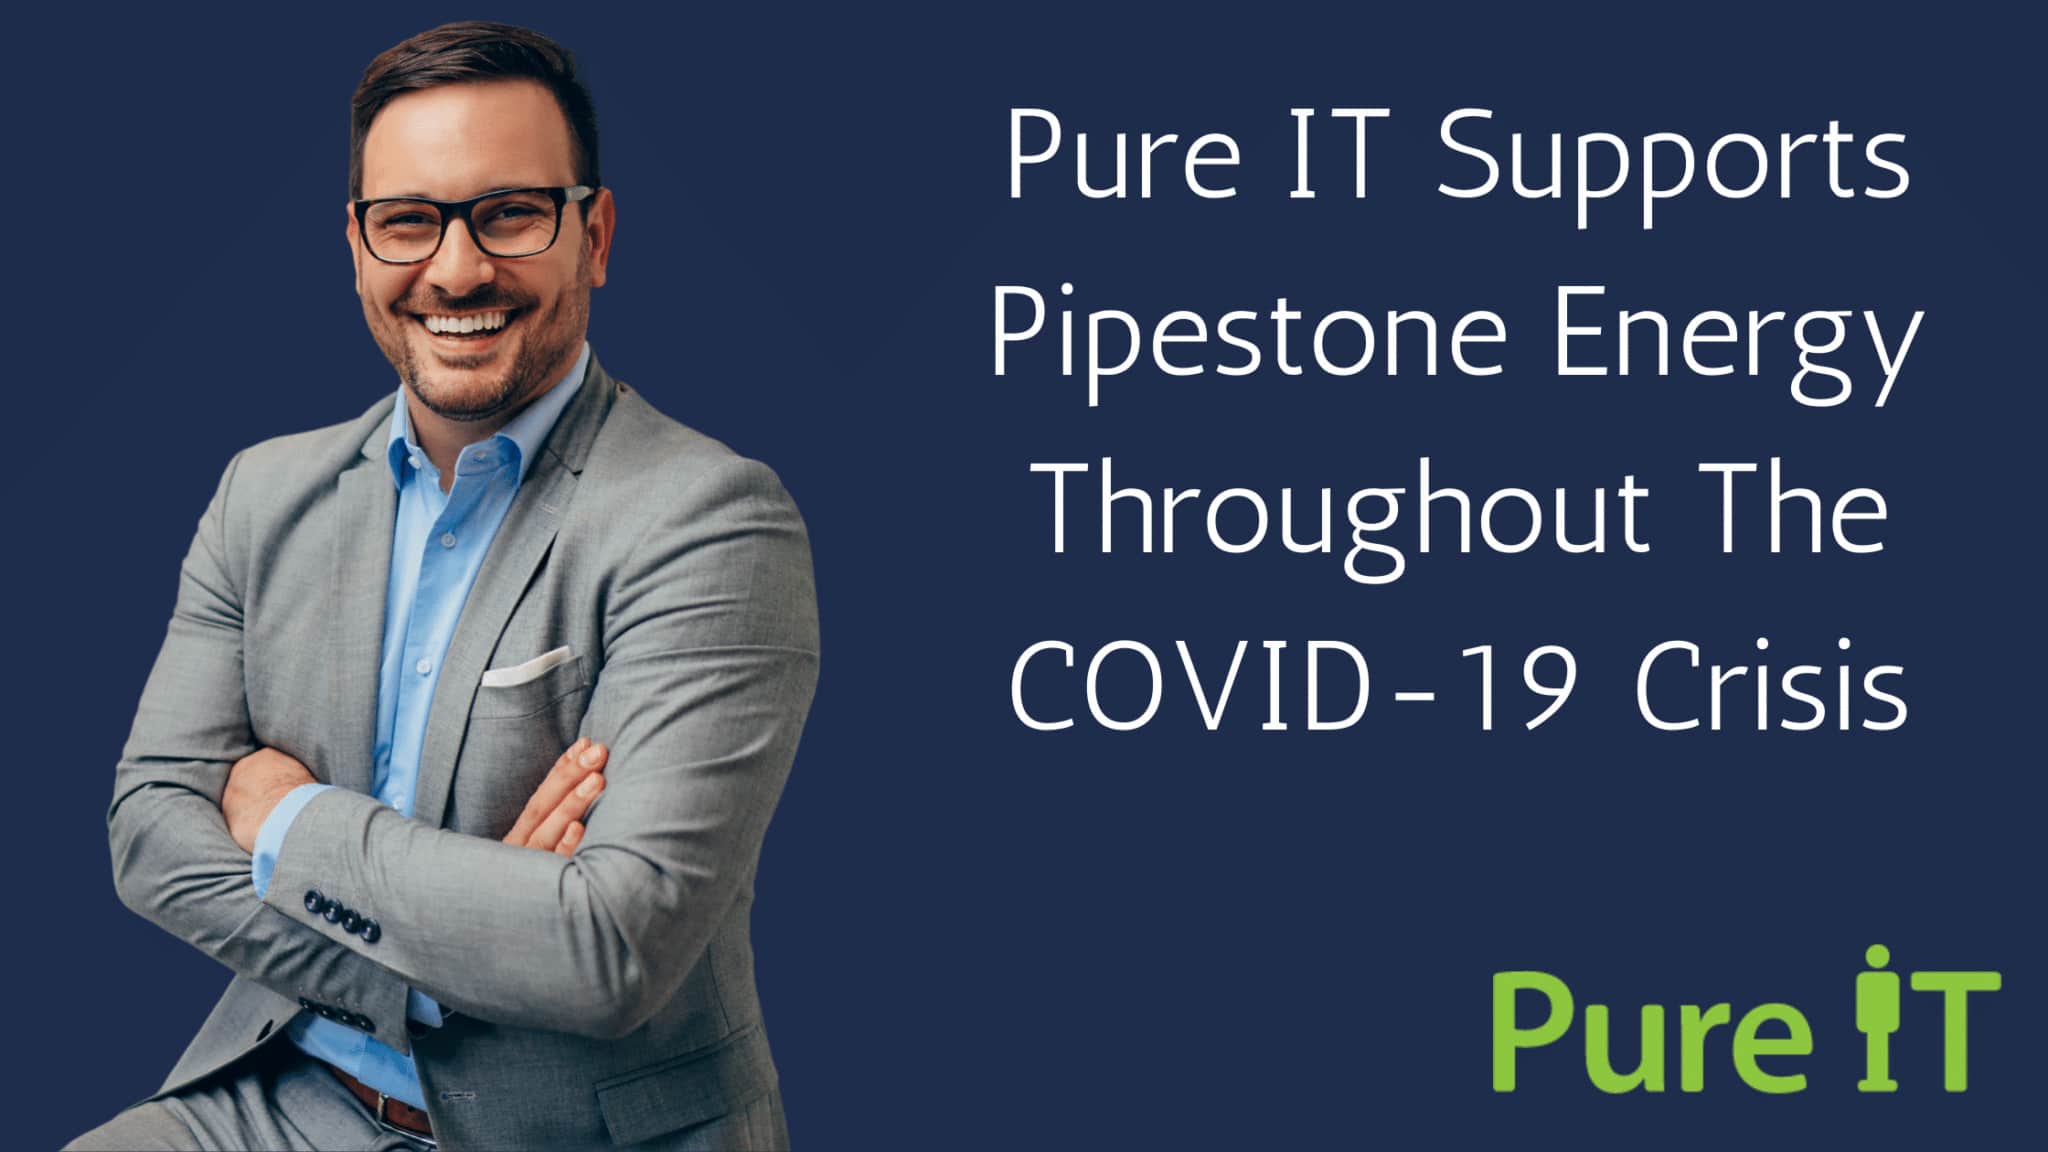 Pure IT Supports Pipestone Energy Throughout The COVID-19 Crisis